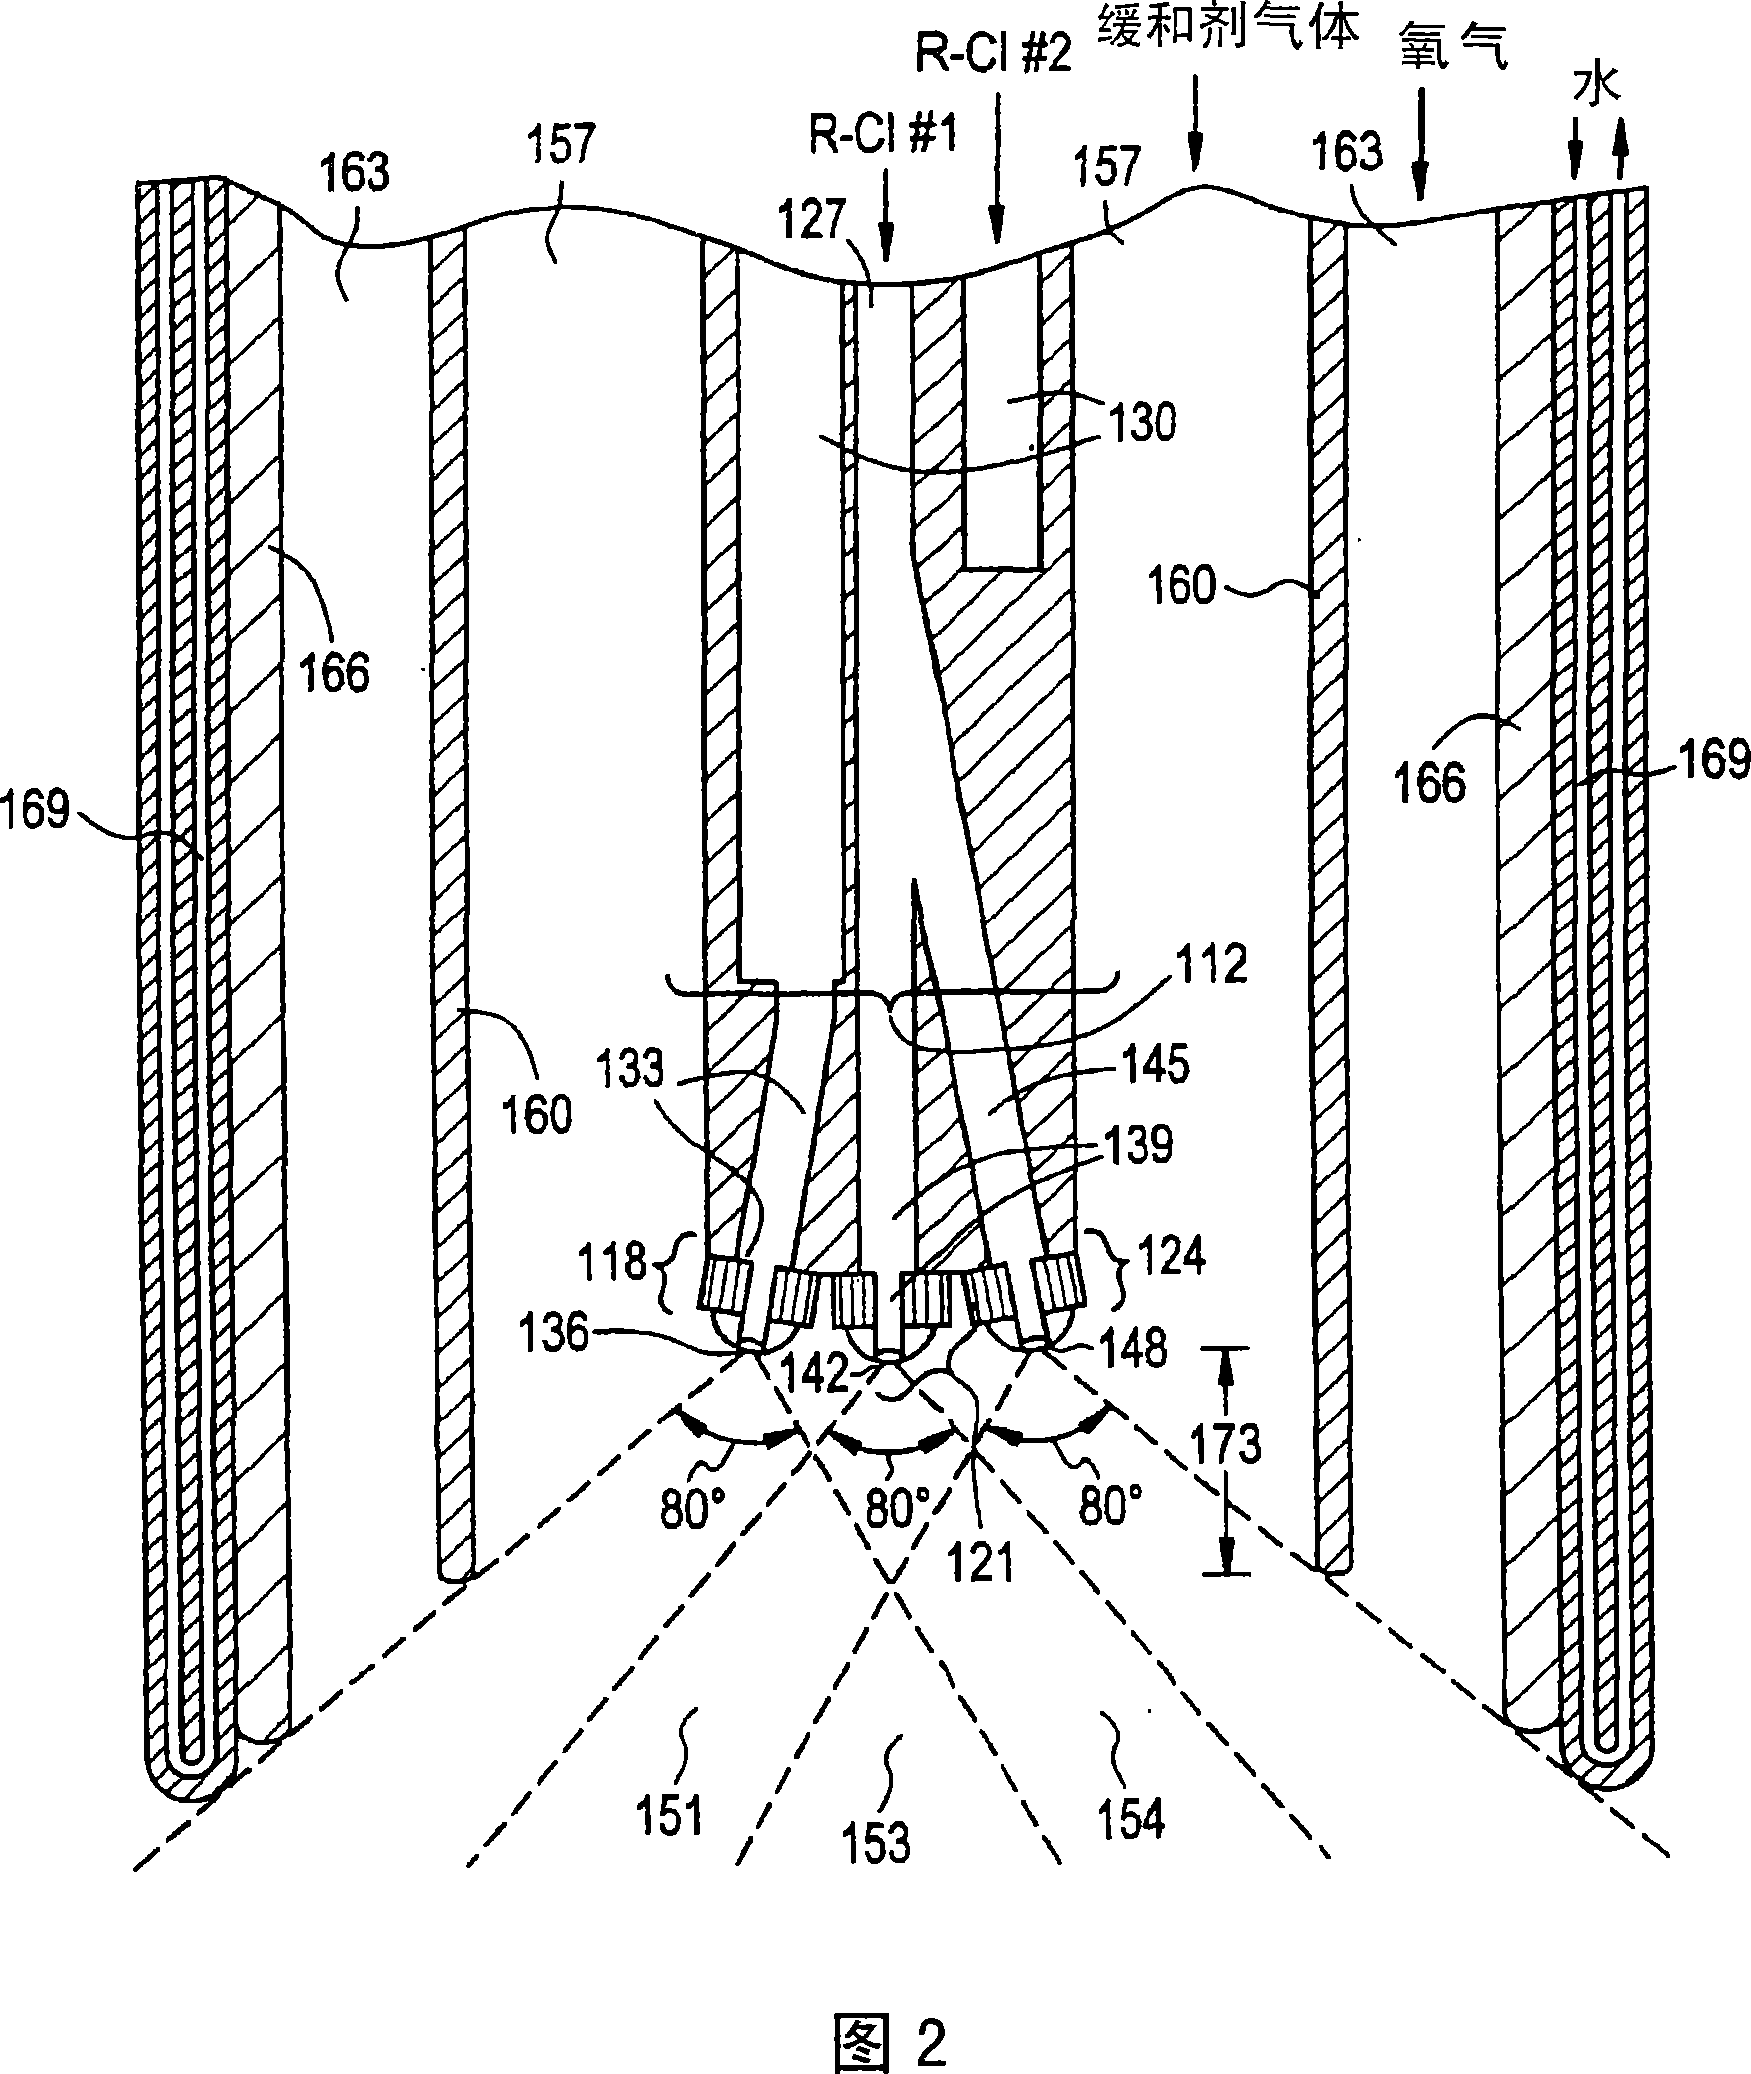 Feed nozzle assembly and burner apparatus for gas/liquid reactions